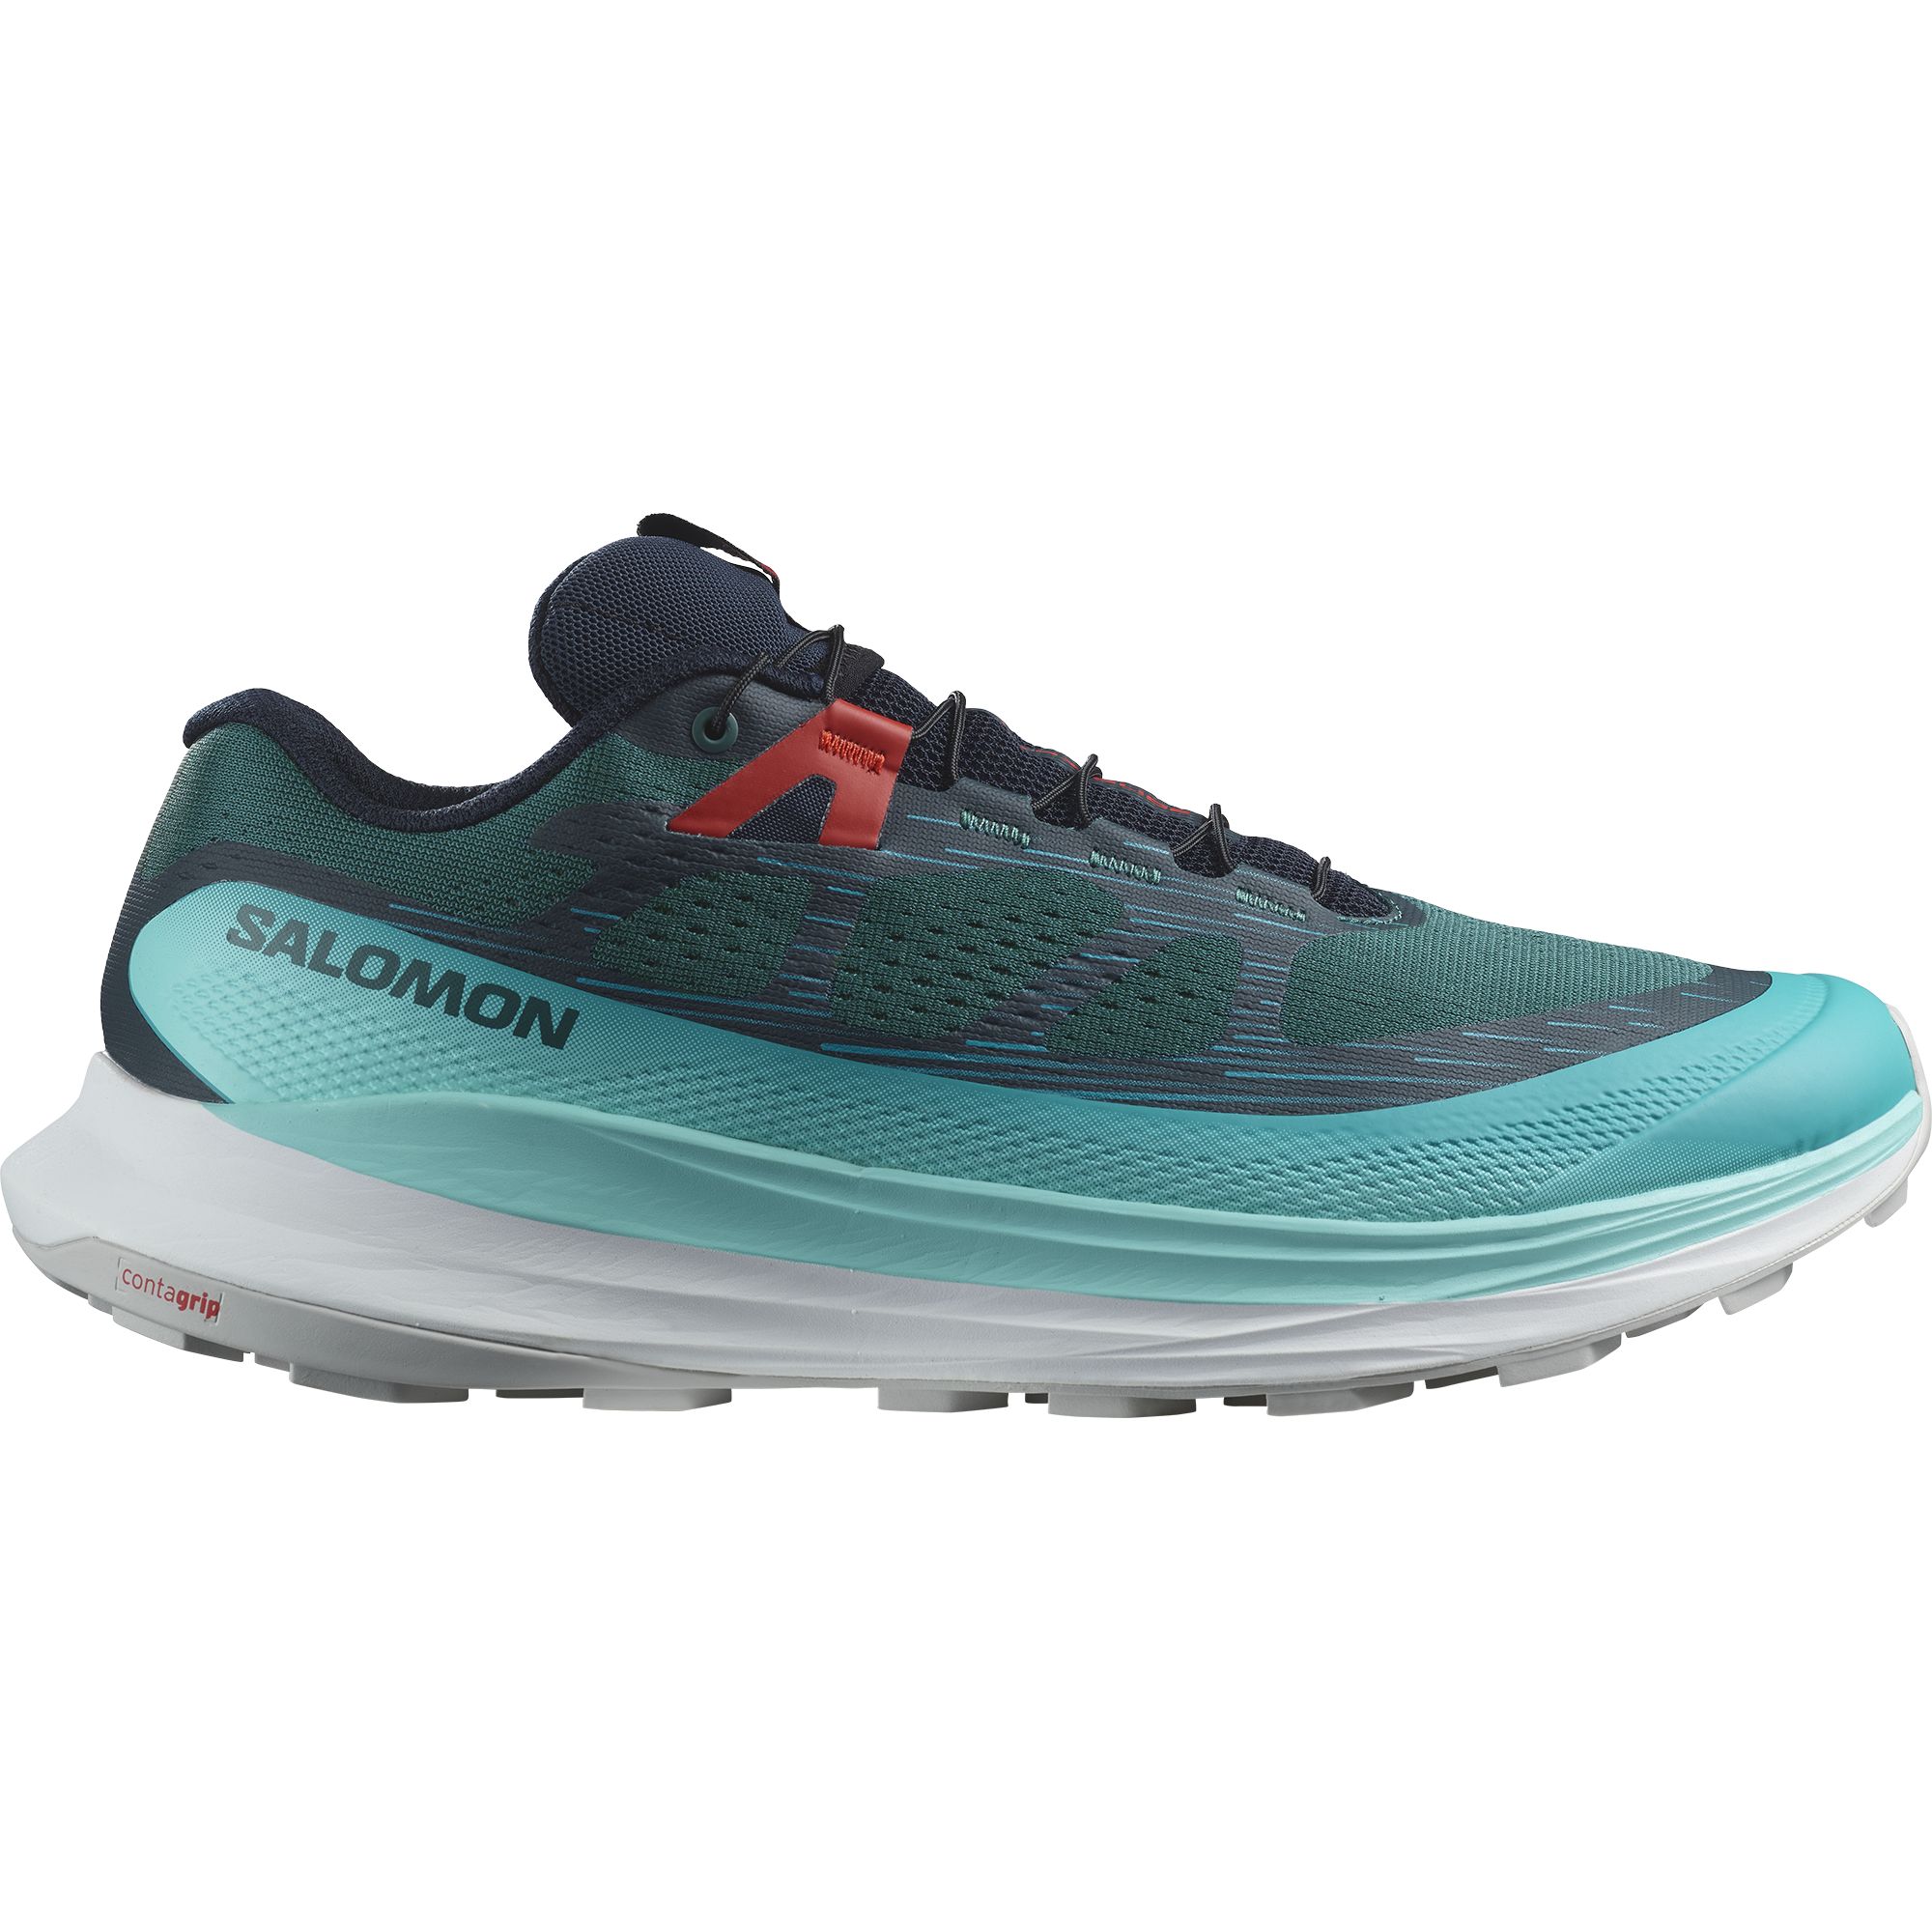 Image of Salomon Men's Ultra Glide 2 Cushioned Lightweight Trail Running Shoes